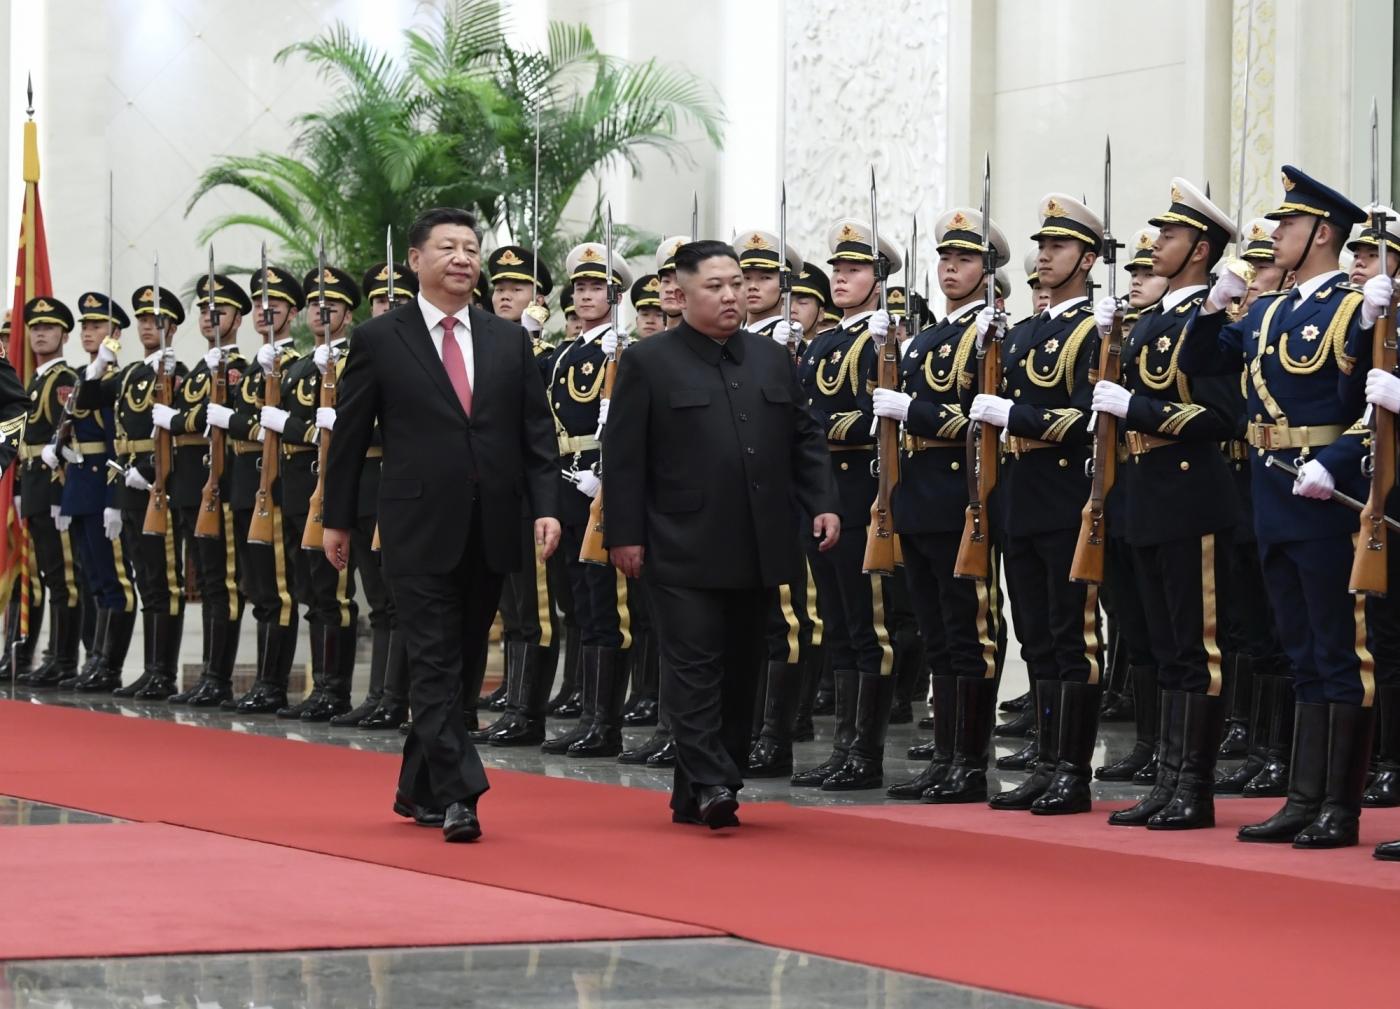 BEIJING, Jan. 10, 2019 (Xinhua) -- Xi Jinping, general secretary of the Central Committee of the Communist Party of China and Chinese president, holds a welcoming ceremony for Kim Jong Un, chairman of the Workers' Party of Korea and chairman of the State Affairs Commission of the Democratic People's Republic of Korea, before their talks at the Great Hall of the People in Beijing, capital of China, Jan. 8, 2019. Xi Jinping on Tuesday held talks with Kim Jong Un, who arrived in Beijing on the same day for a visit to China. (Xinhua/Shen Hong/IANS) by .